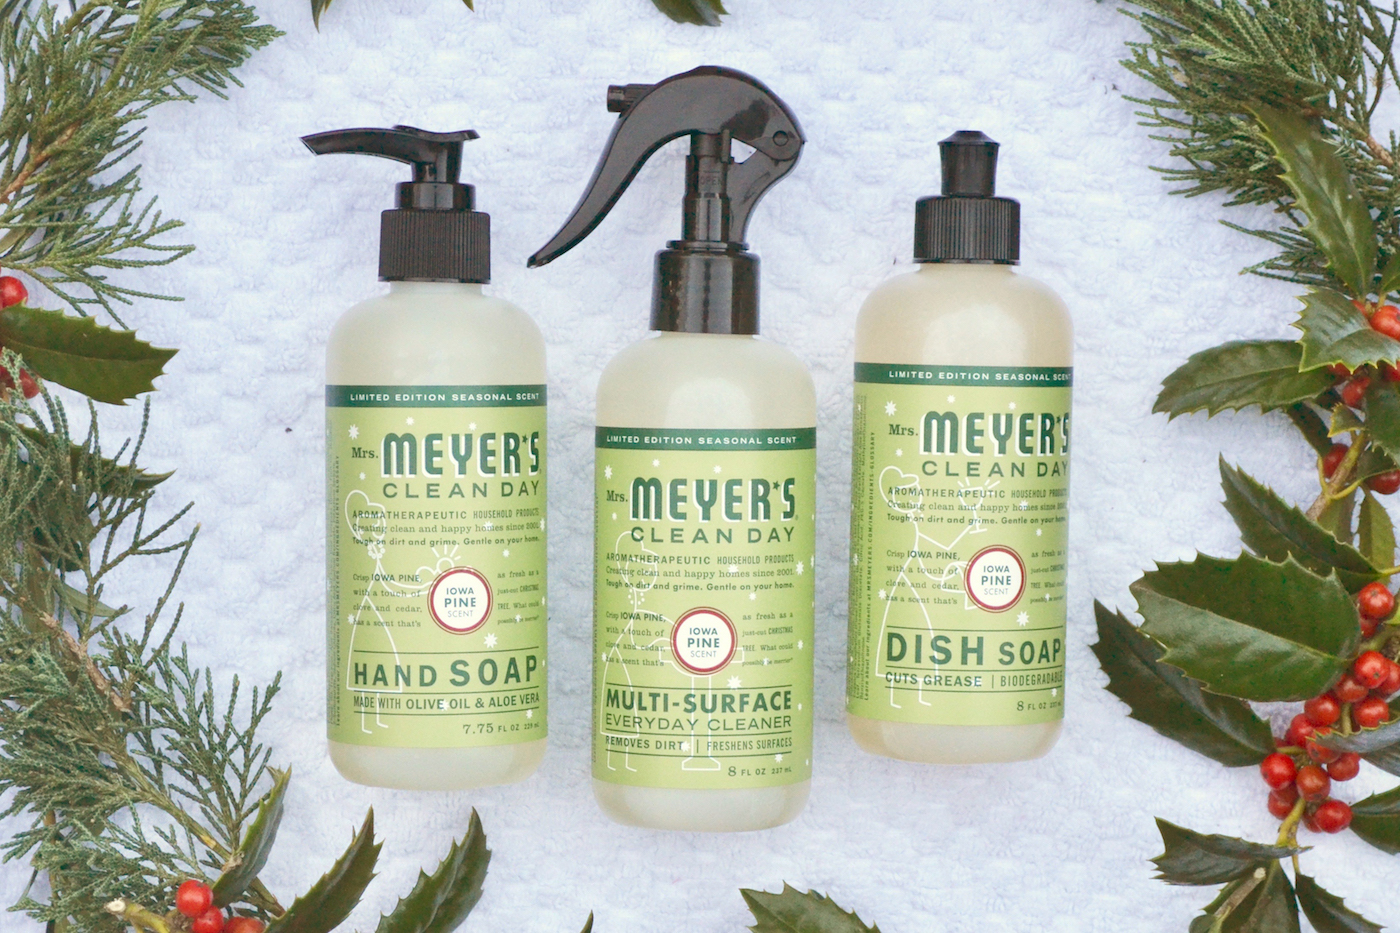 The Scents of the Season with Mrs. Meyers // www.thehiveblog.com